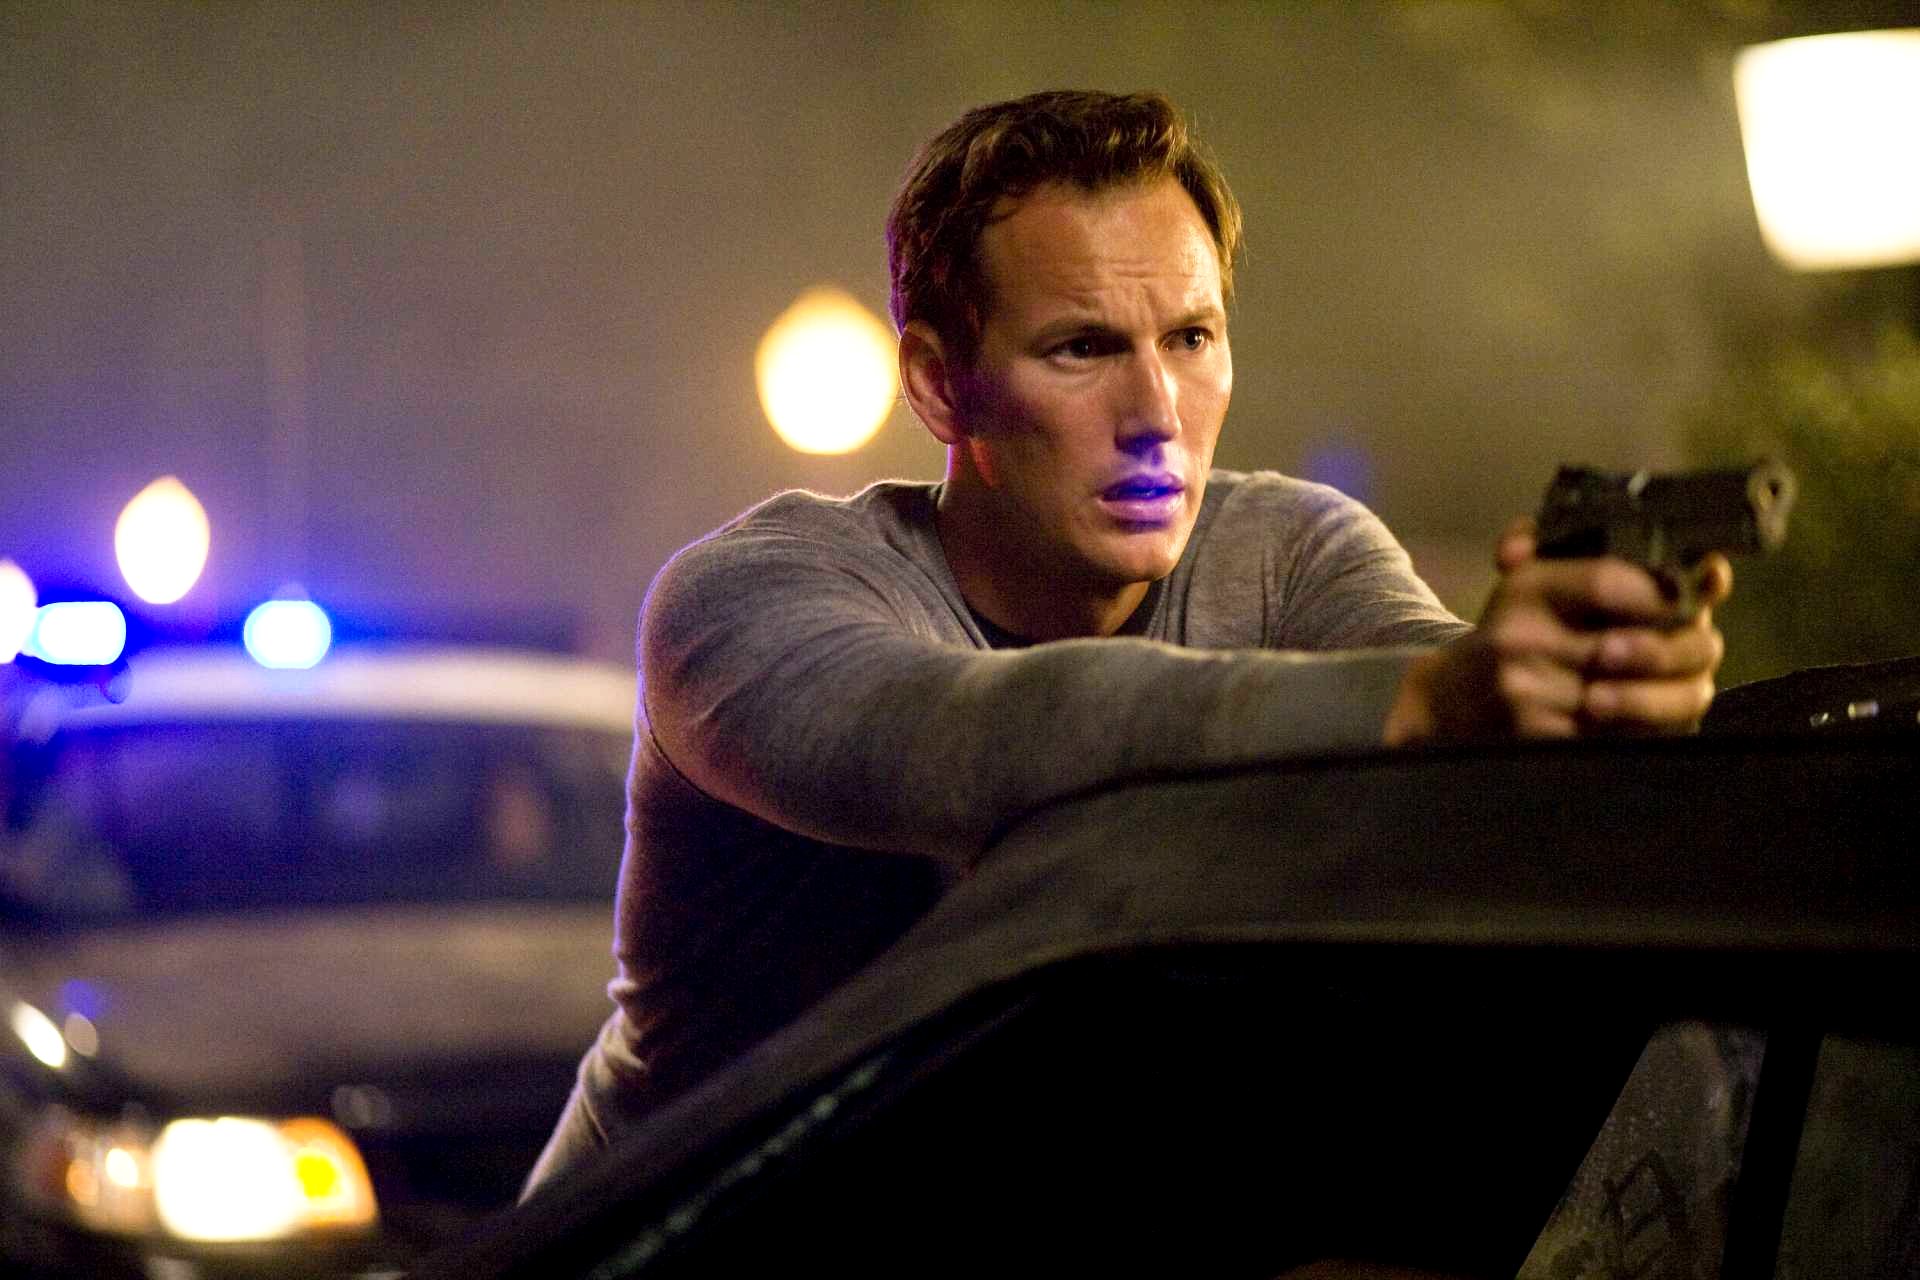 Patrick Wilson stars as Chris Mattson in Screen Gems' Lakeview Terrace (2008). Photo credit by Chuck Zlotnick.